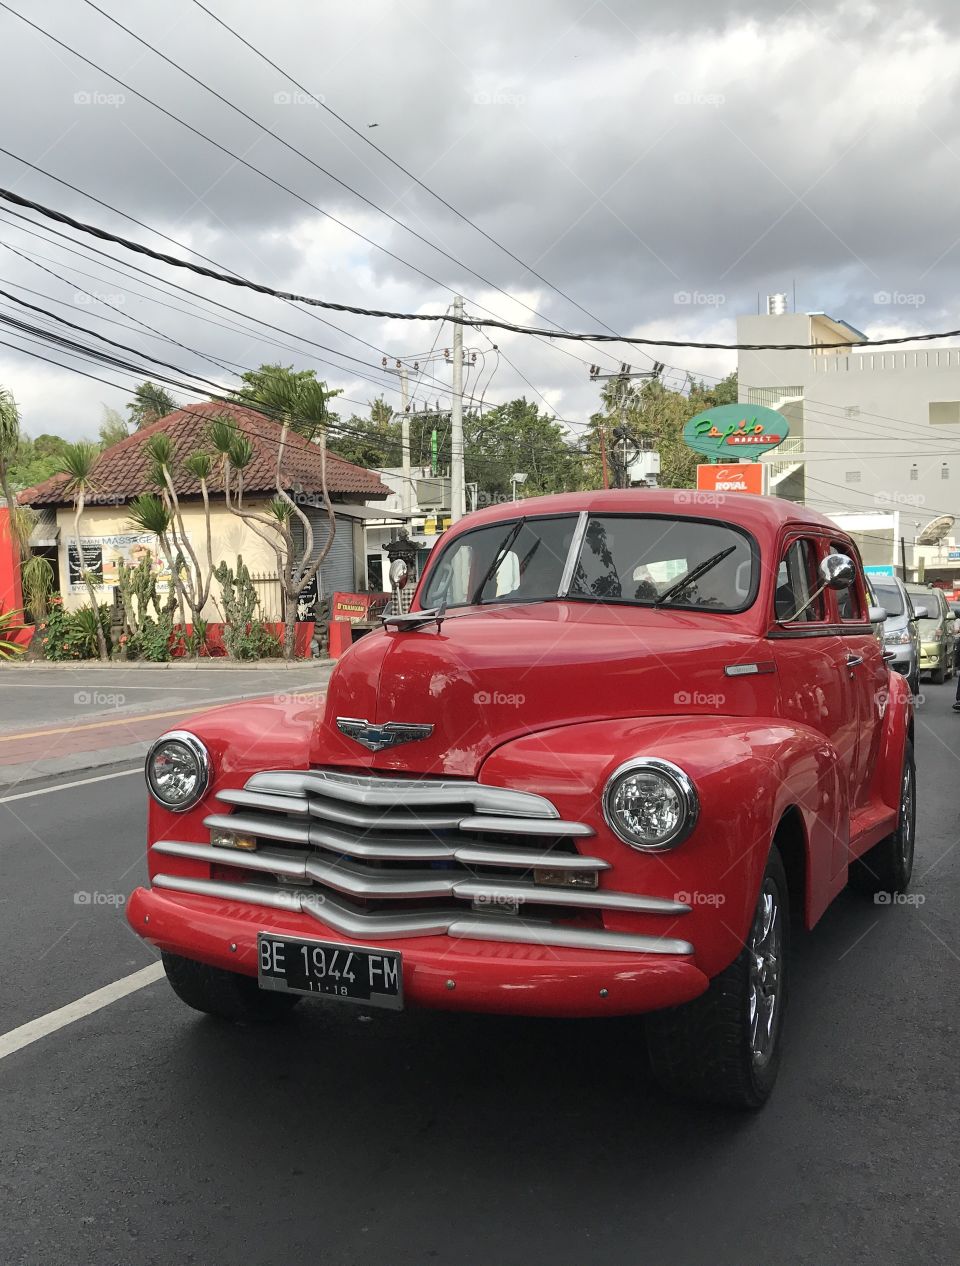 Chevrolet ancient car red